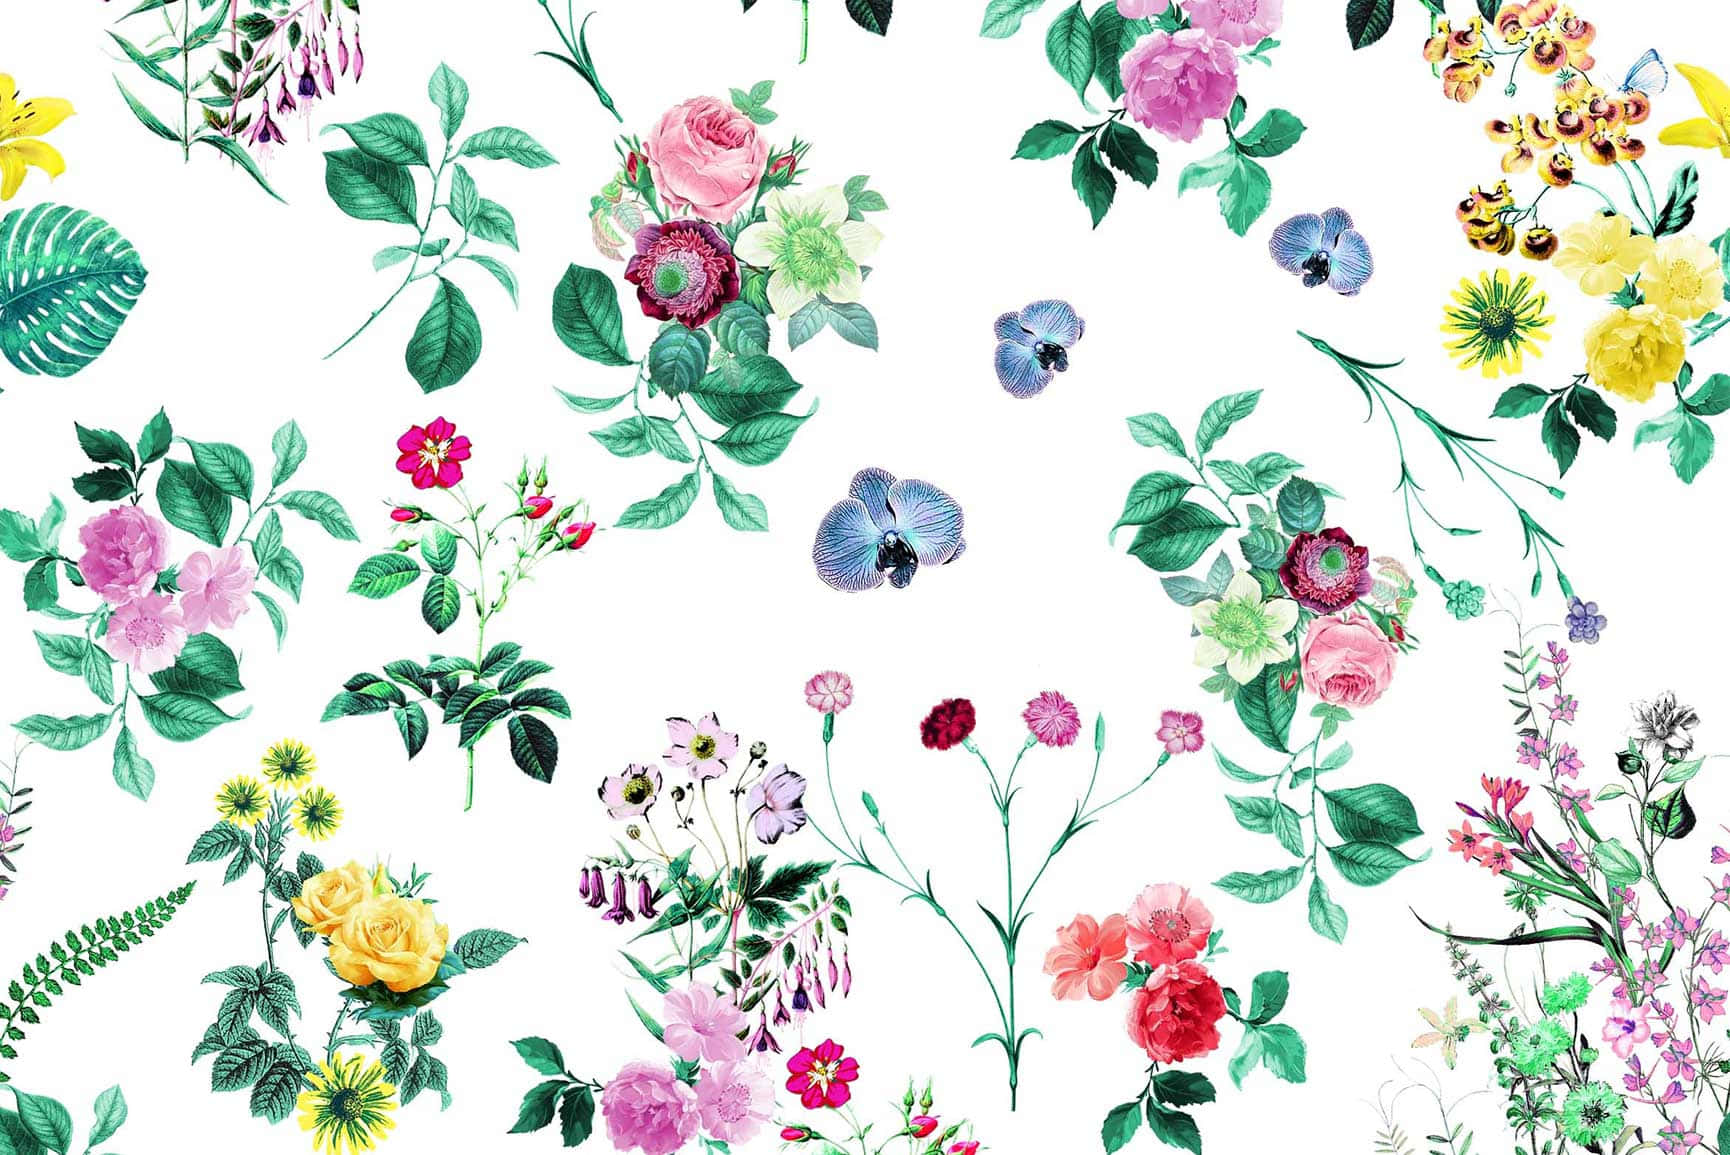 Different Flowers With Leaves Cute Floral Wallpaper